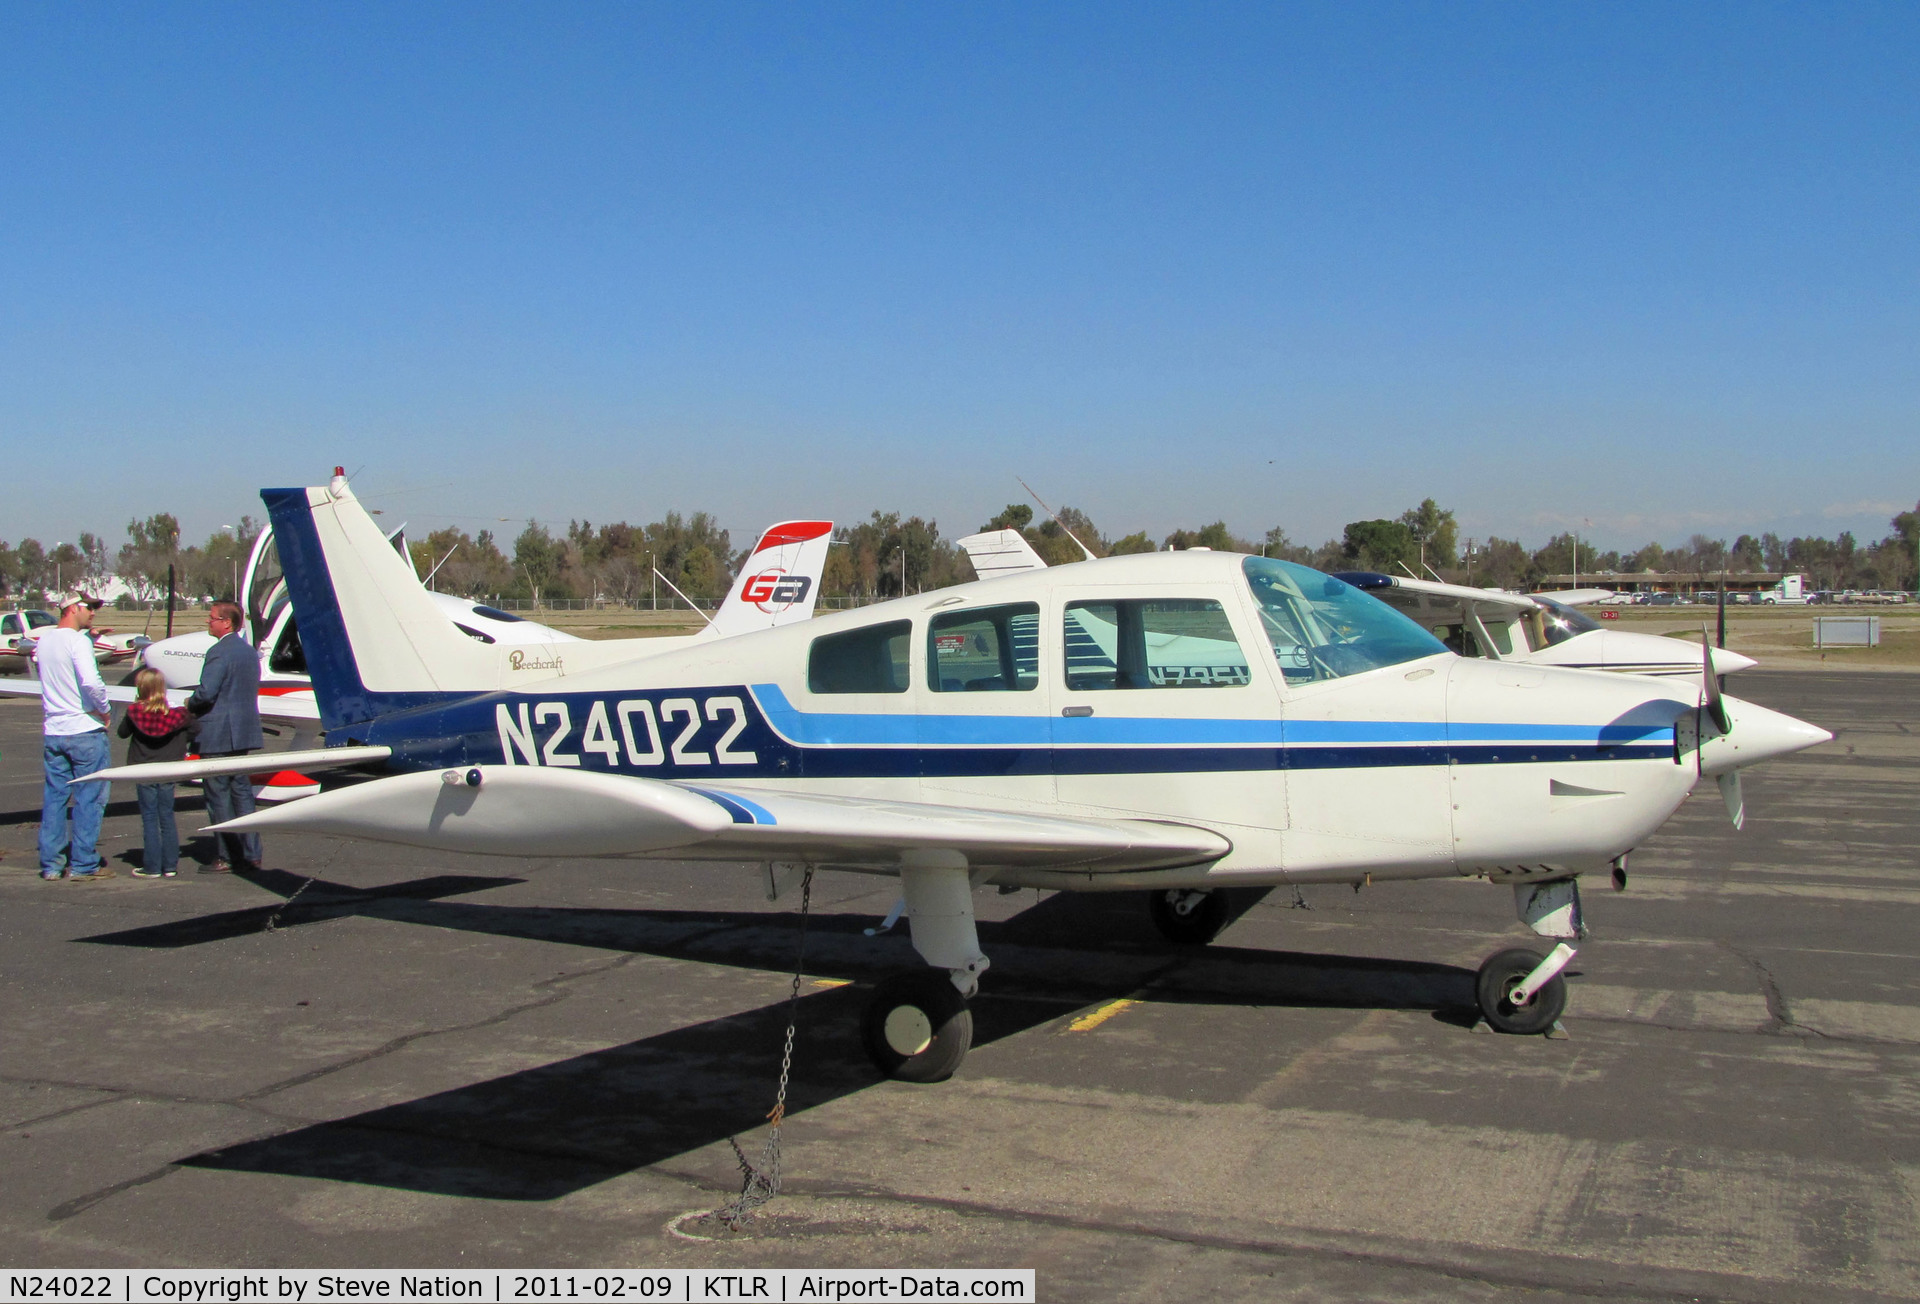 N24022, 1977 Beech C23 Sundowner 180 C/N M-1927, Concord Trading Inc. (Paramount, CA) 1977 Beech C23 visiting Tulare, CA Tulare, CA for International Ag Expo